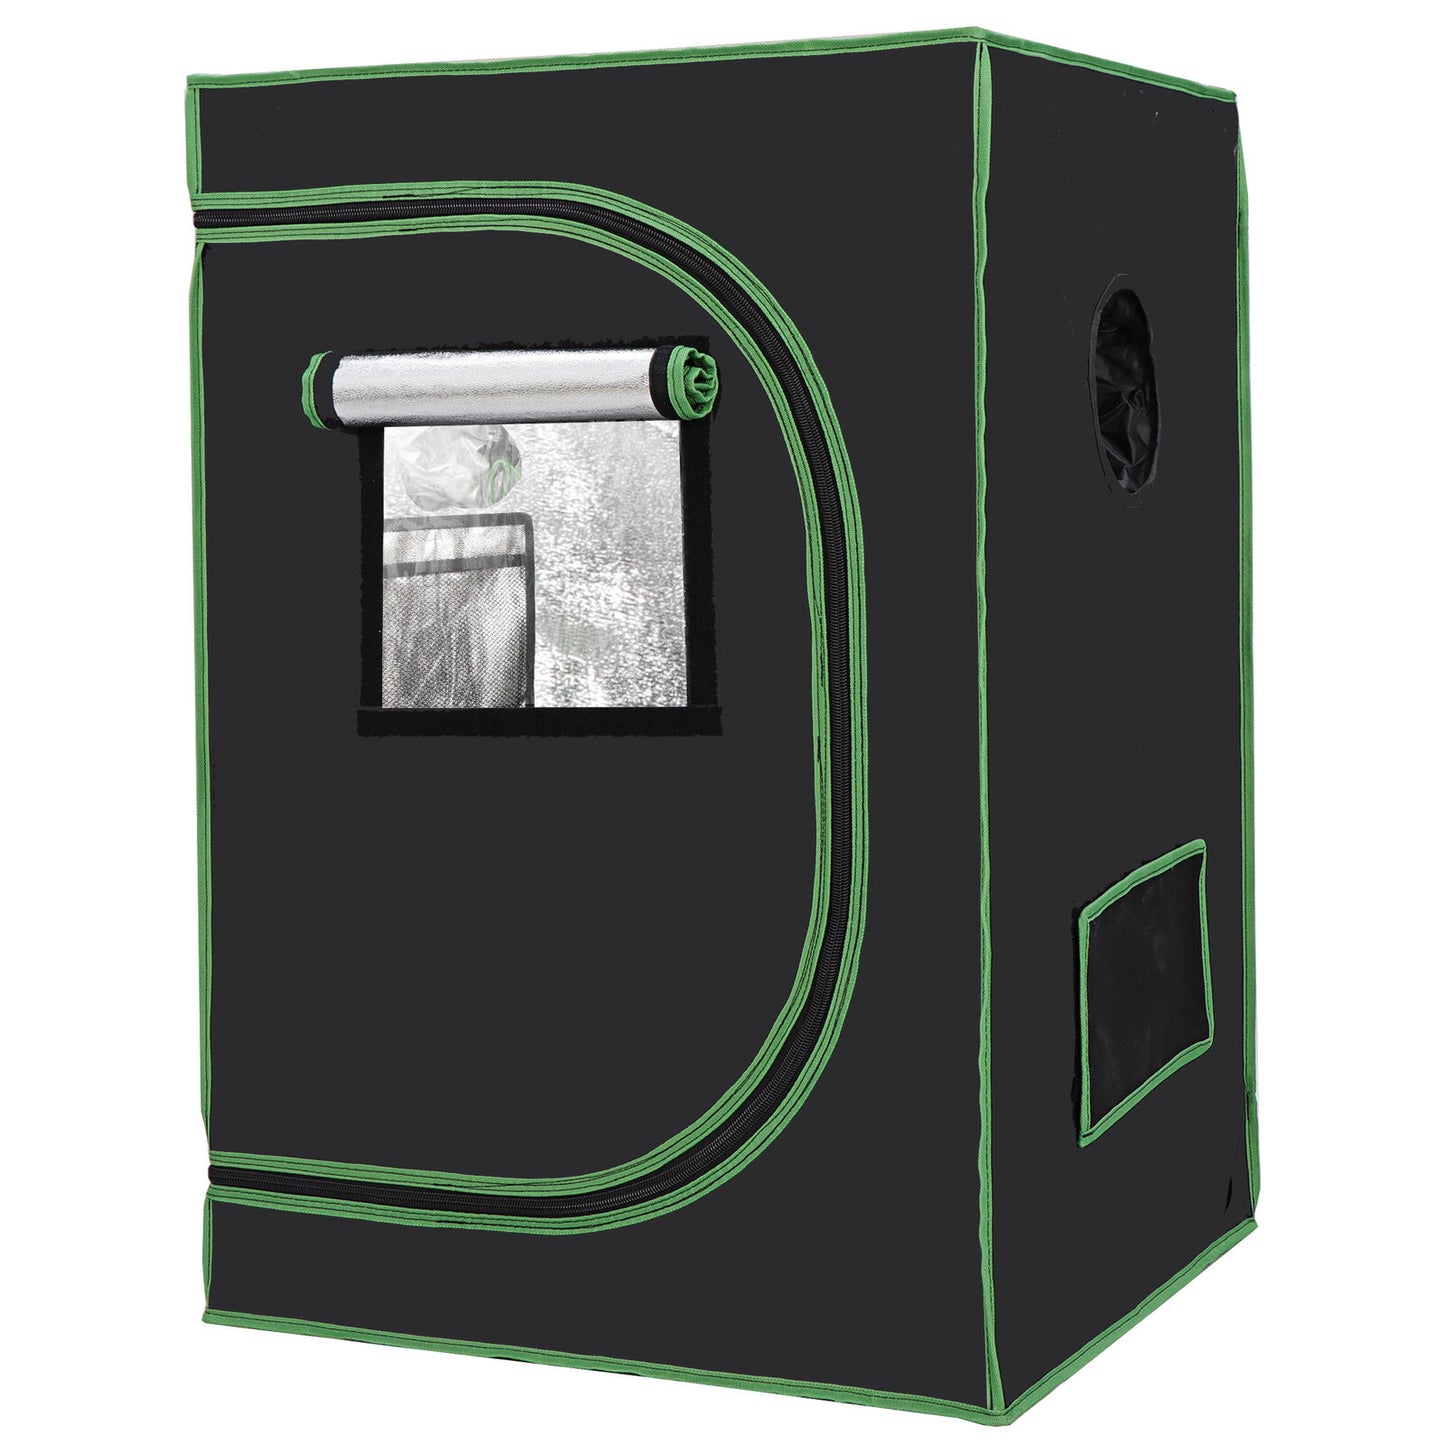 24""x24""x36" Indoor Hydroponic Grow Tent with Observation Window and Floor Tray